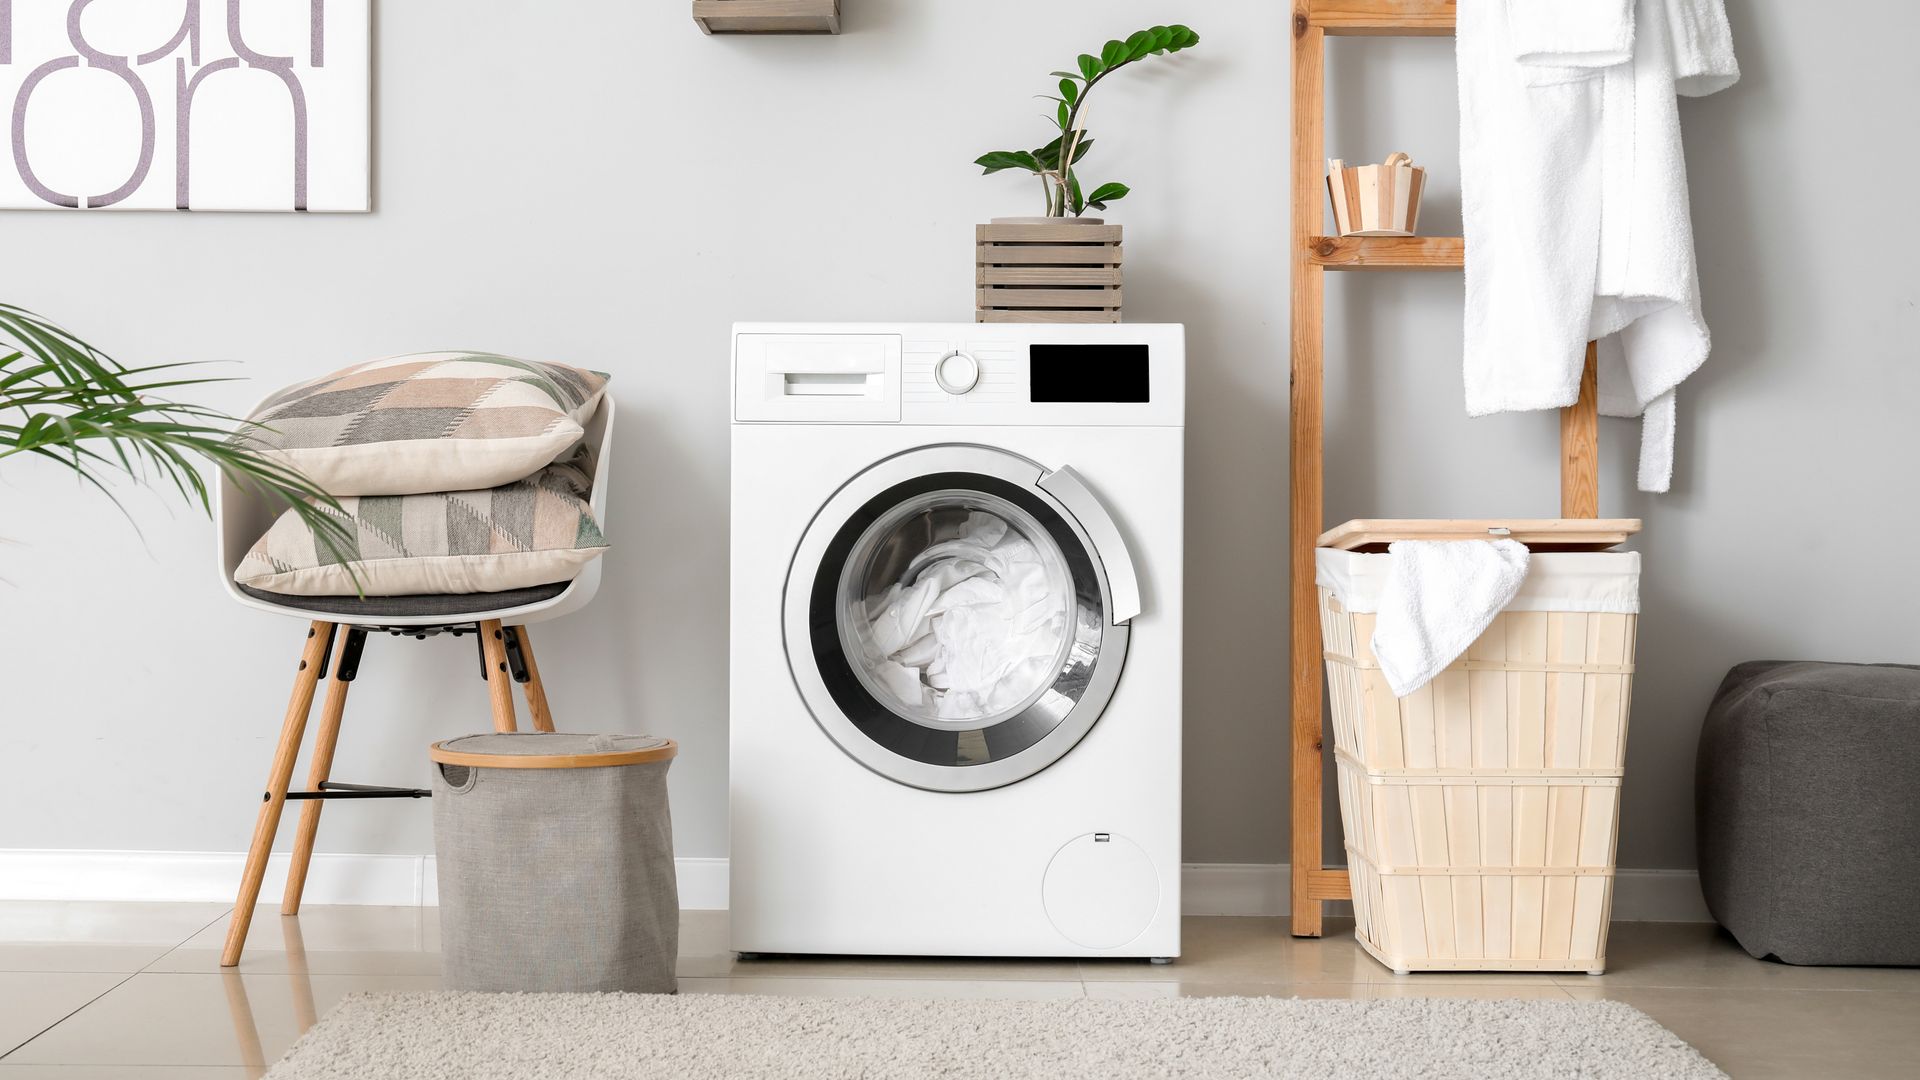 15 Things you should never put in a washing machine | Tom's Guide